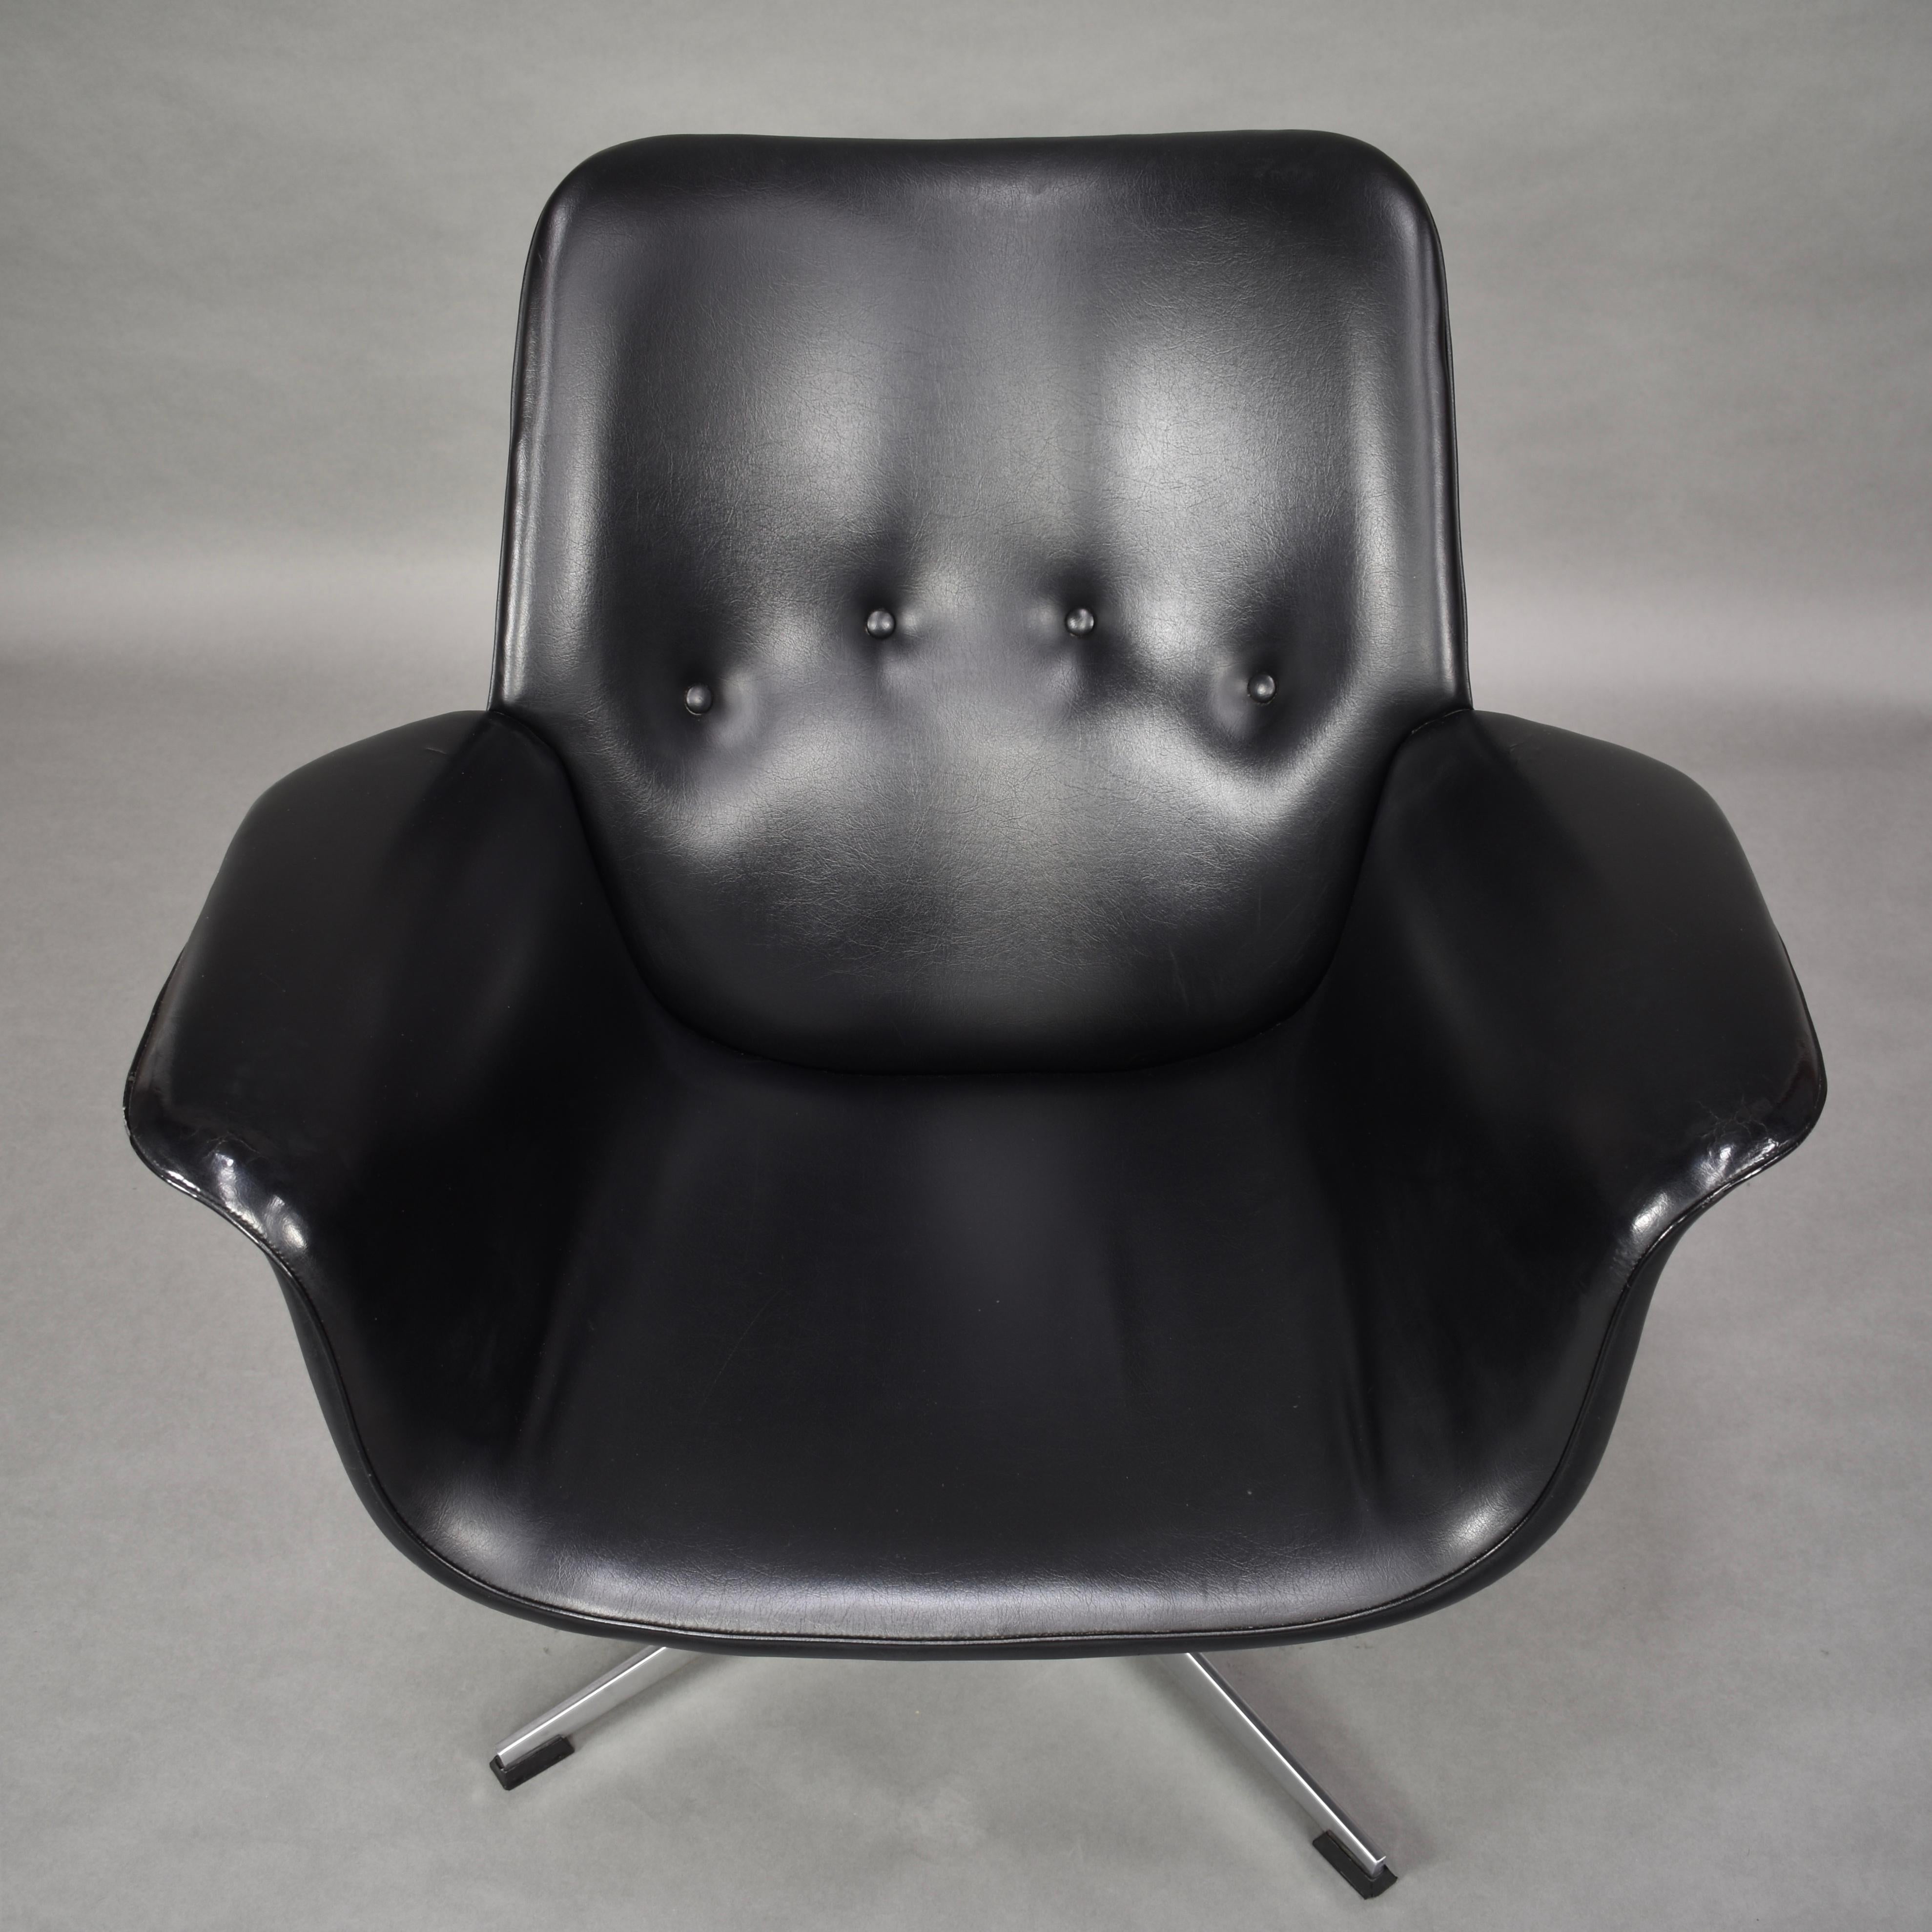 Amazing executive swivel lounge chair by Topform– Netherlands, circa 1950.

Design: Unknown

Manufacturer: TOPFORM Label on the bottom.

Date of manufacture: circa 1950

Model: Swivel arm chair

Material: Chrome / faux leather / plastic